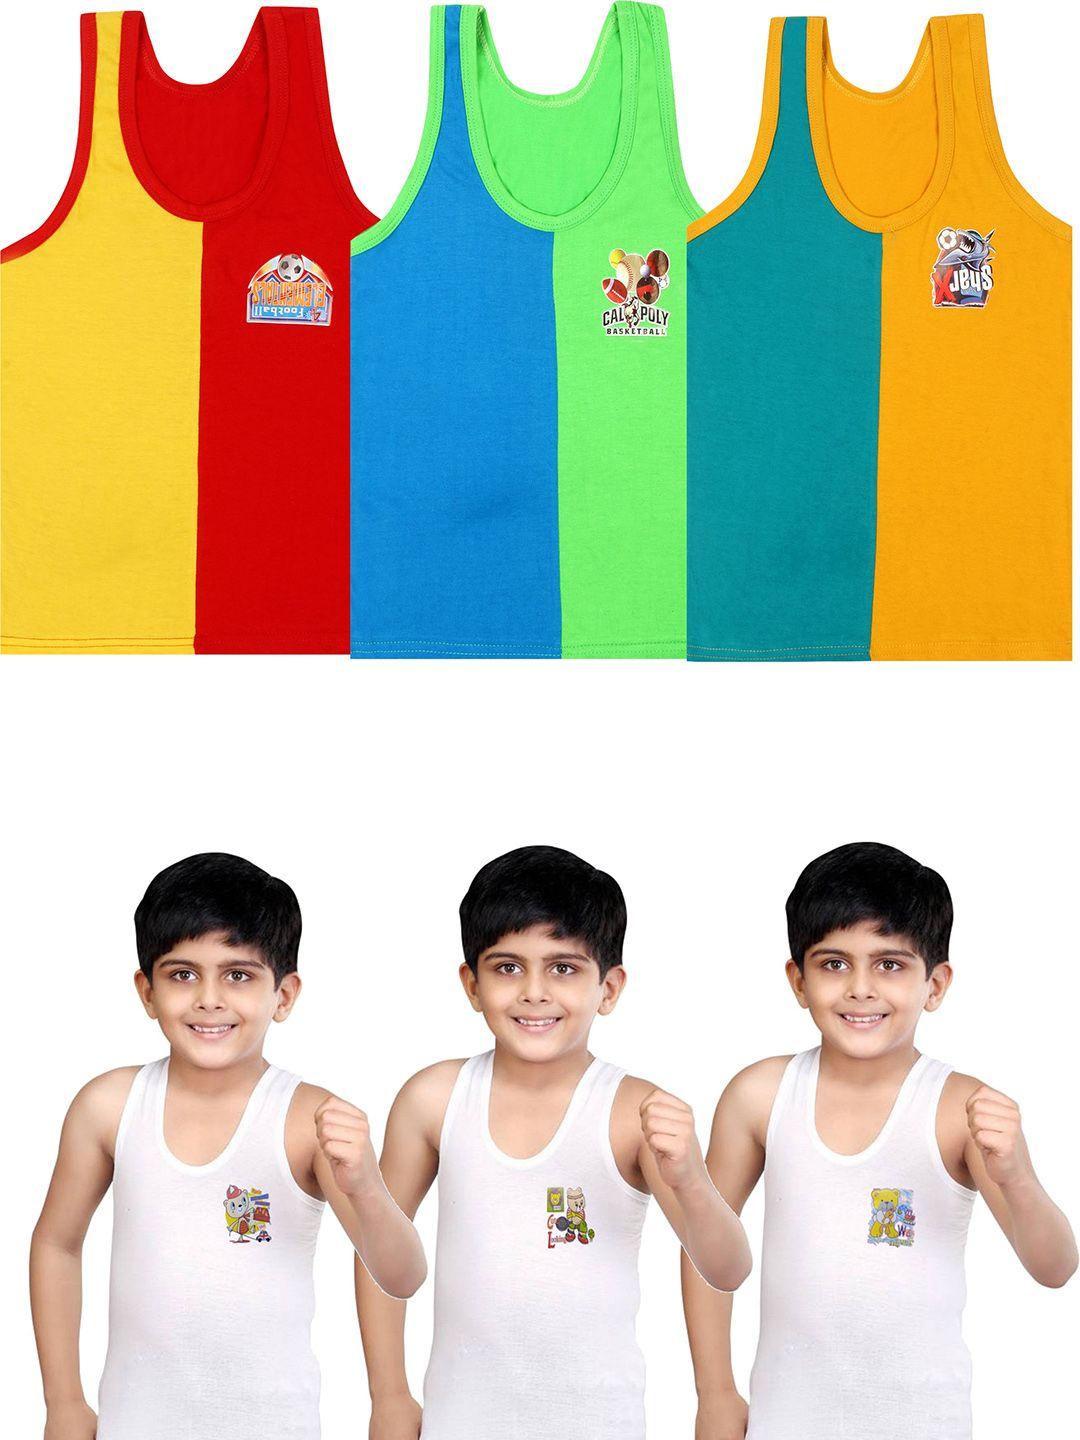 careplus pack of 6 printed cotton basic vests